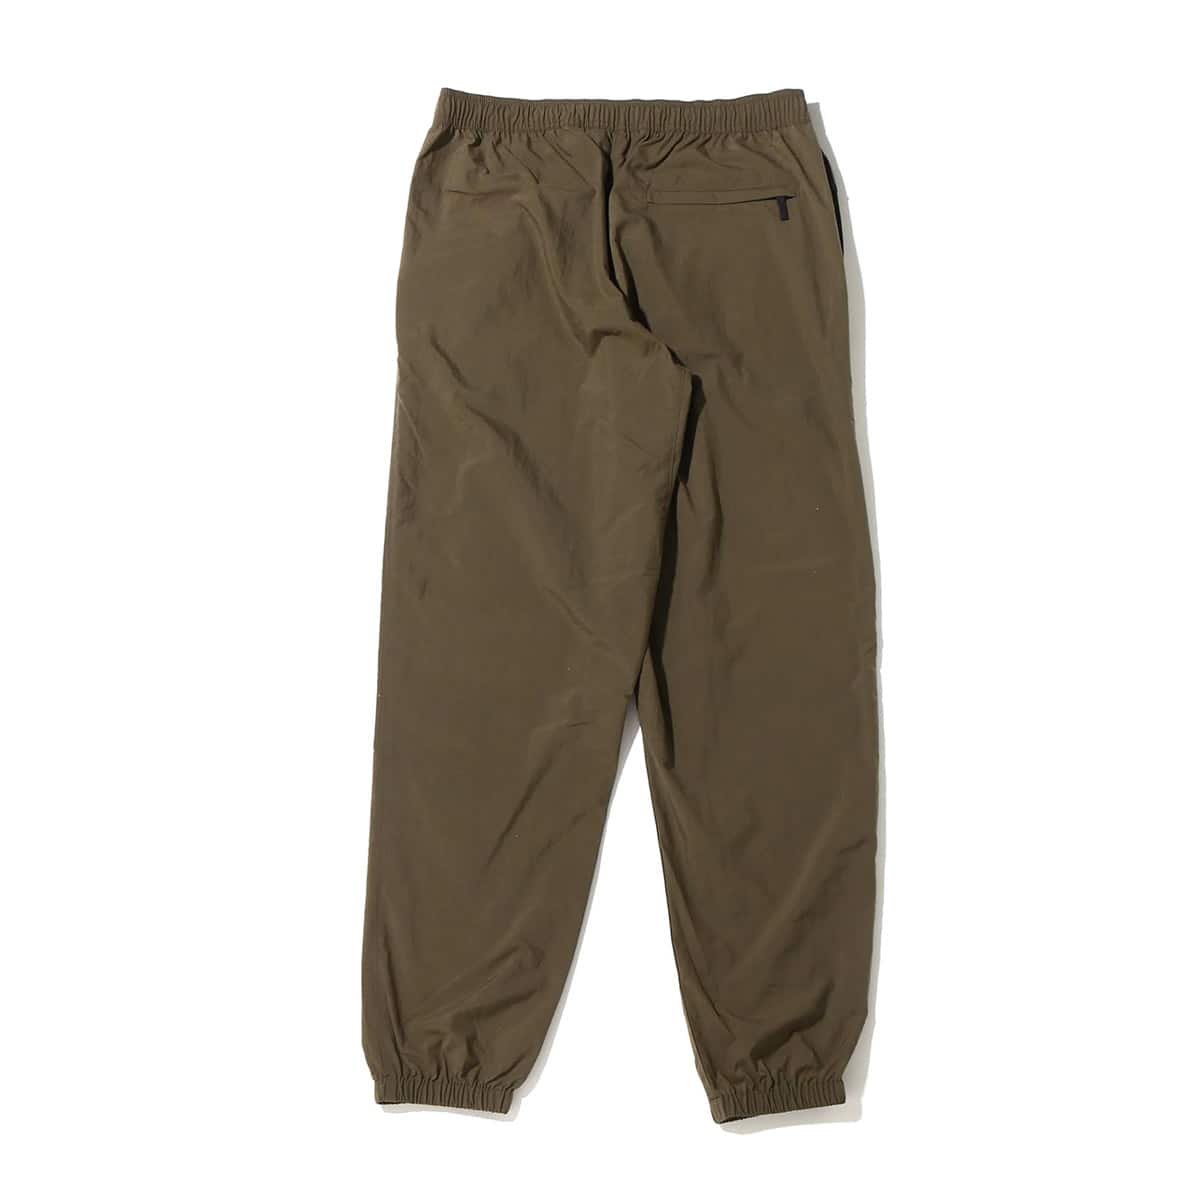 THE NORTH FACE VERSATILE PANT NEWTAUPE